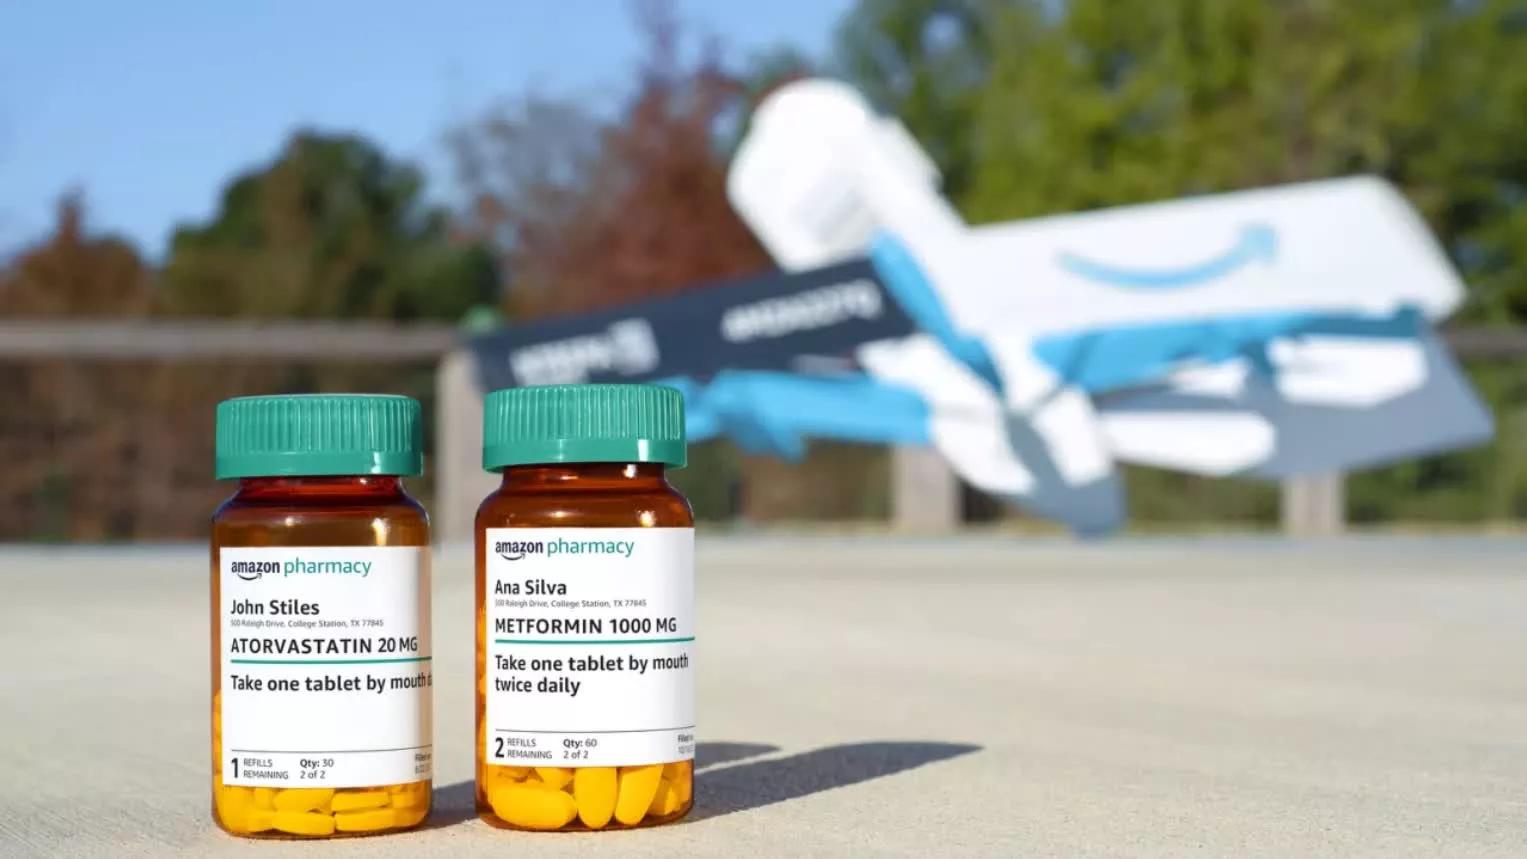 Amazon Pharmacy leverages AI and local distribution to speed up prescription deliveries [Video]